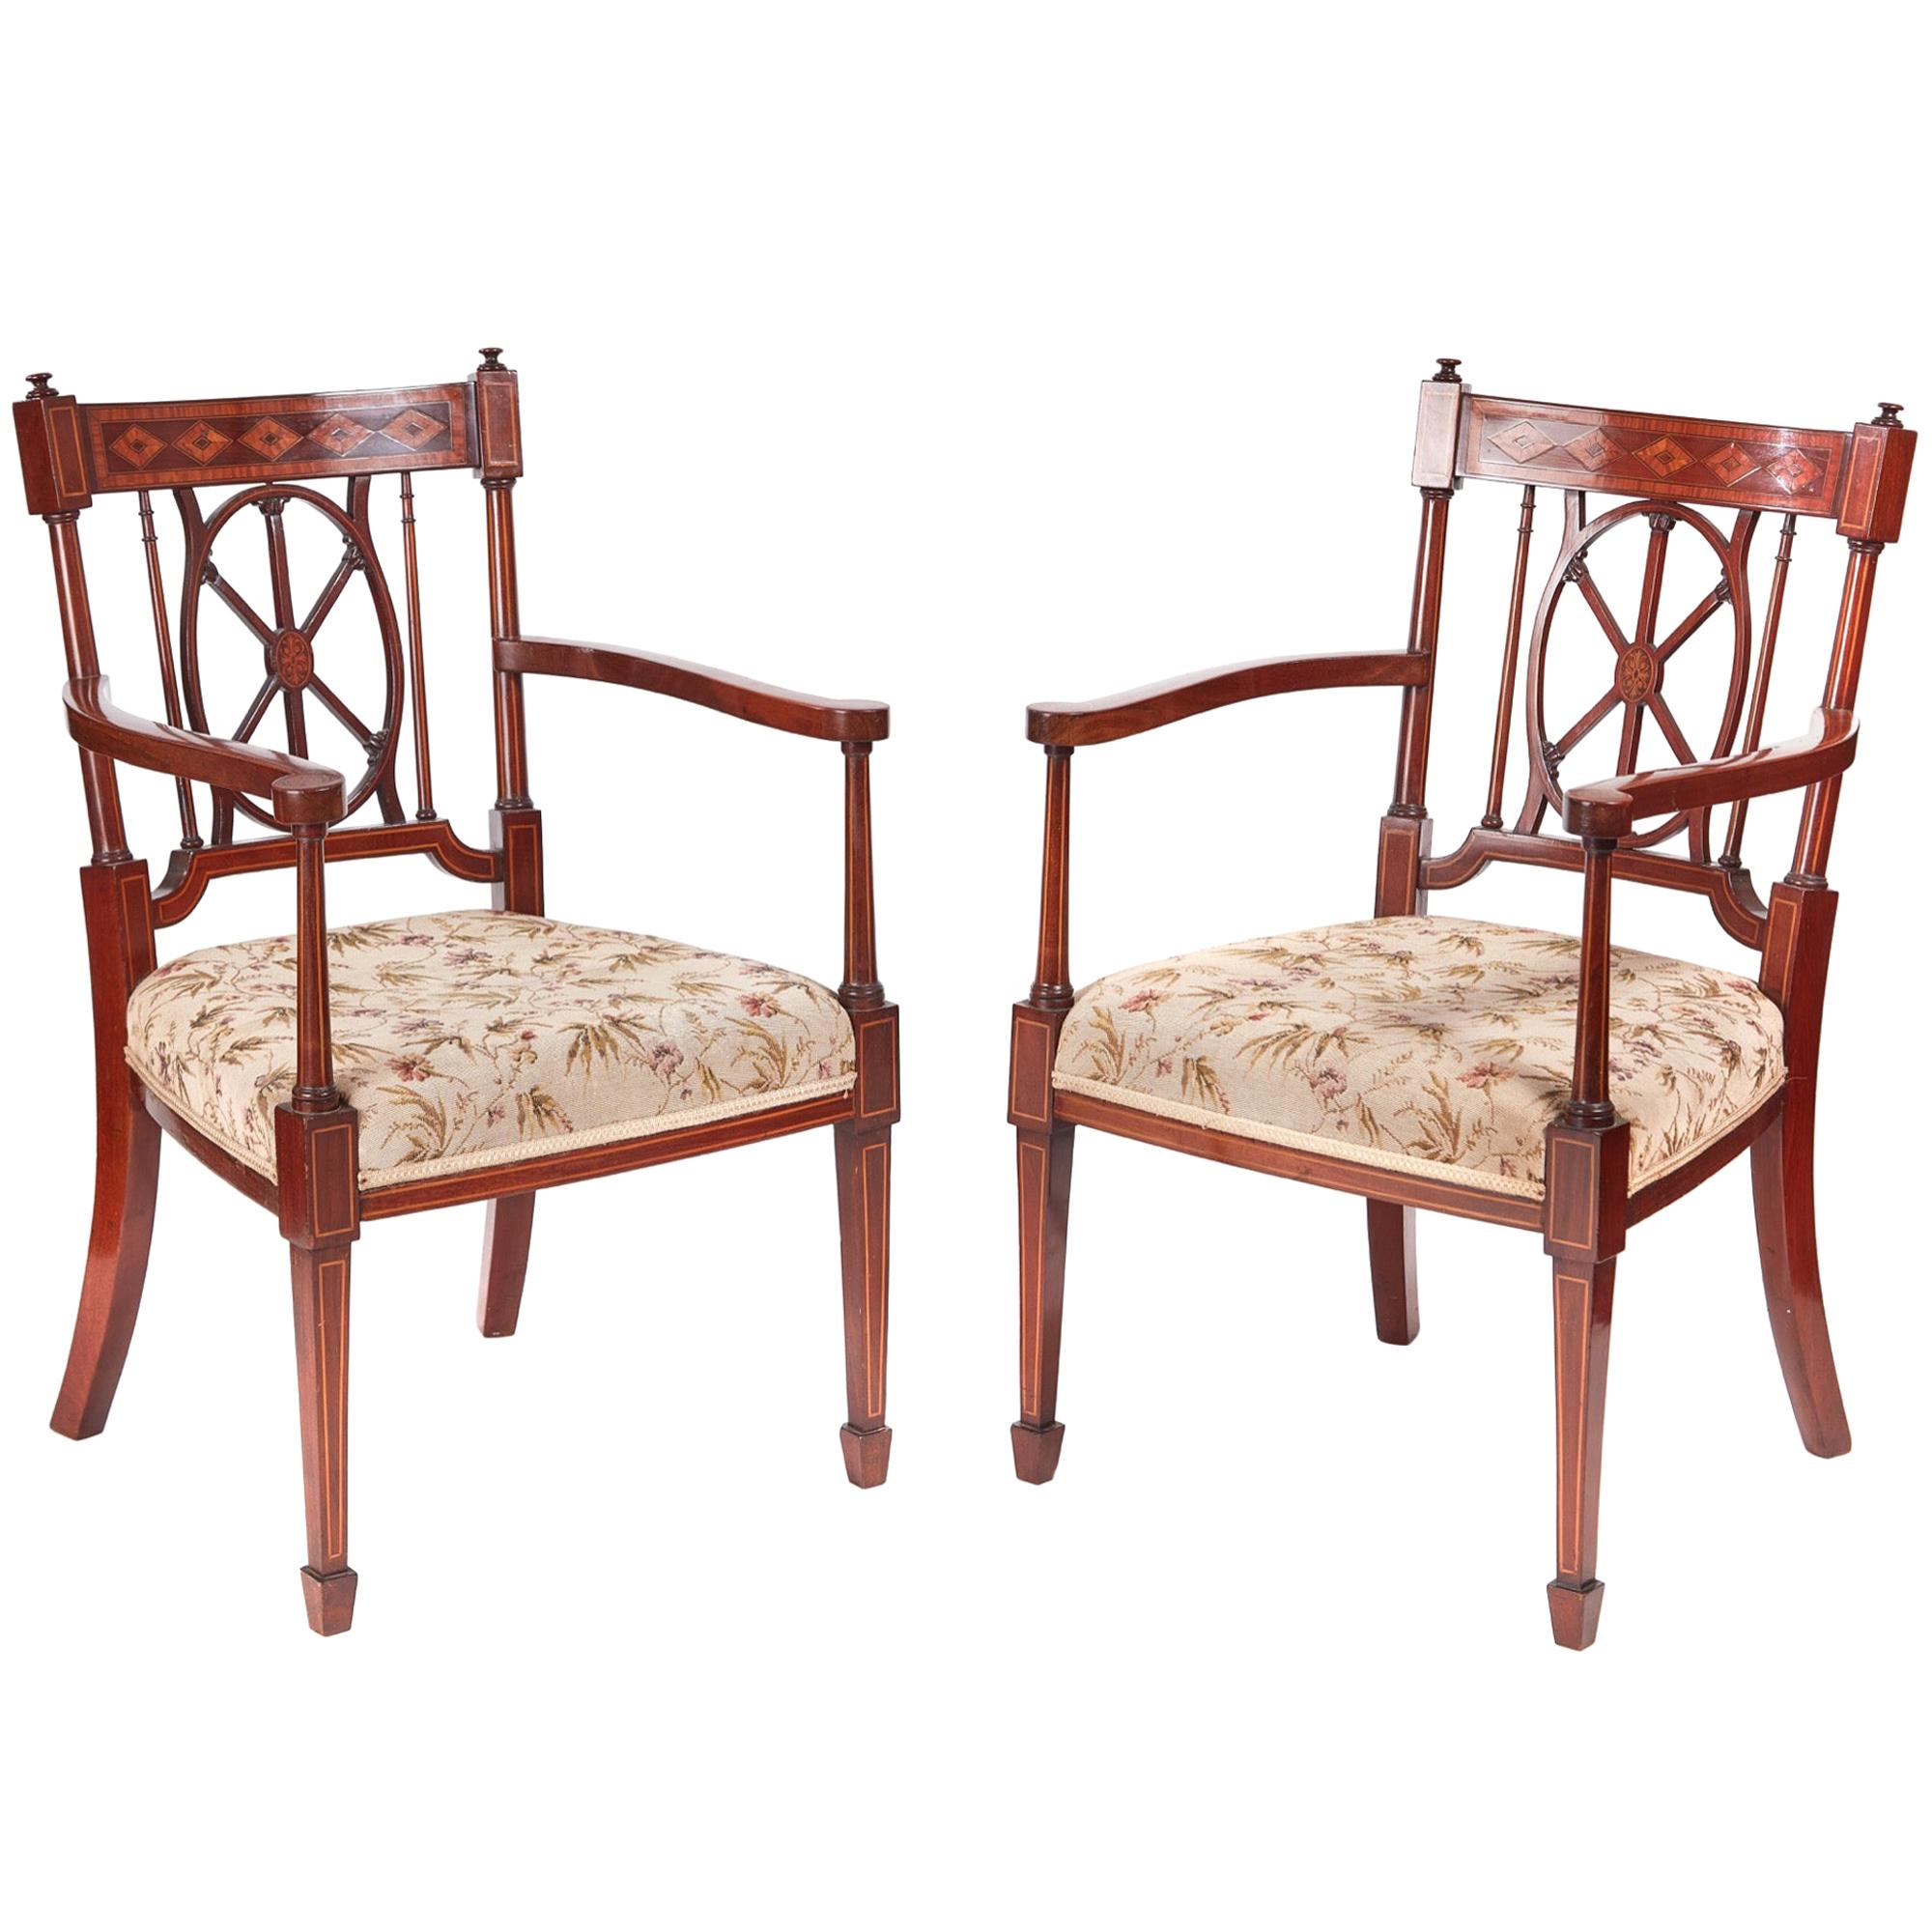 Quality Pair of Antique Mahogany Inlaid Arm or Desk Chairs